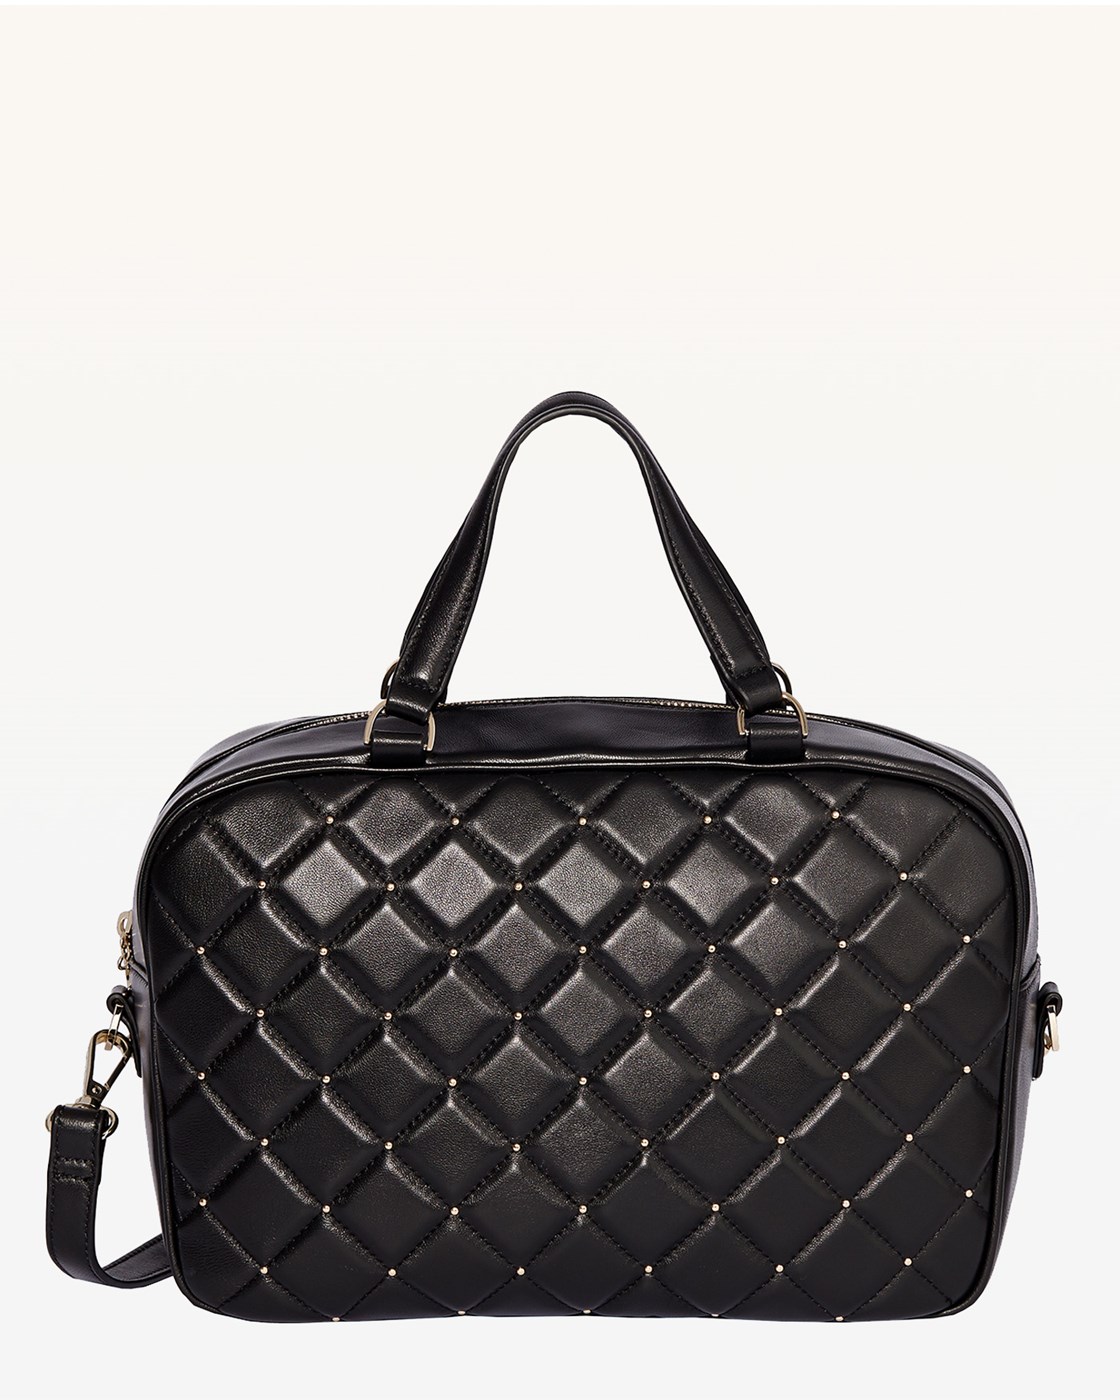 Juicy Couture Norwood Black Leather Crossbody Bag